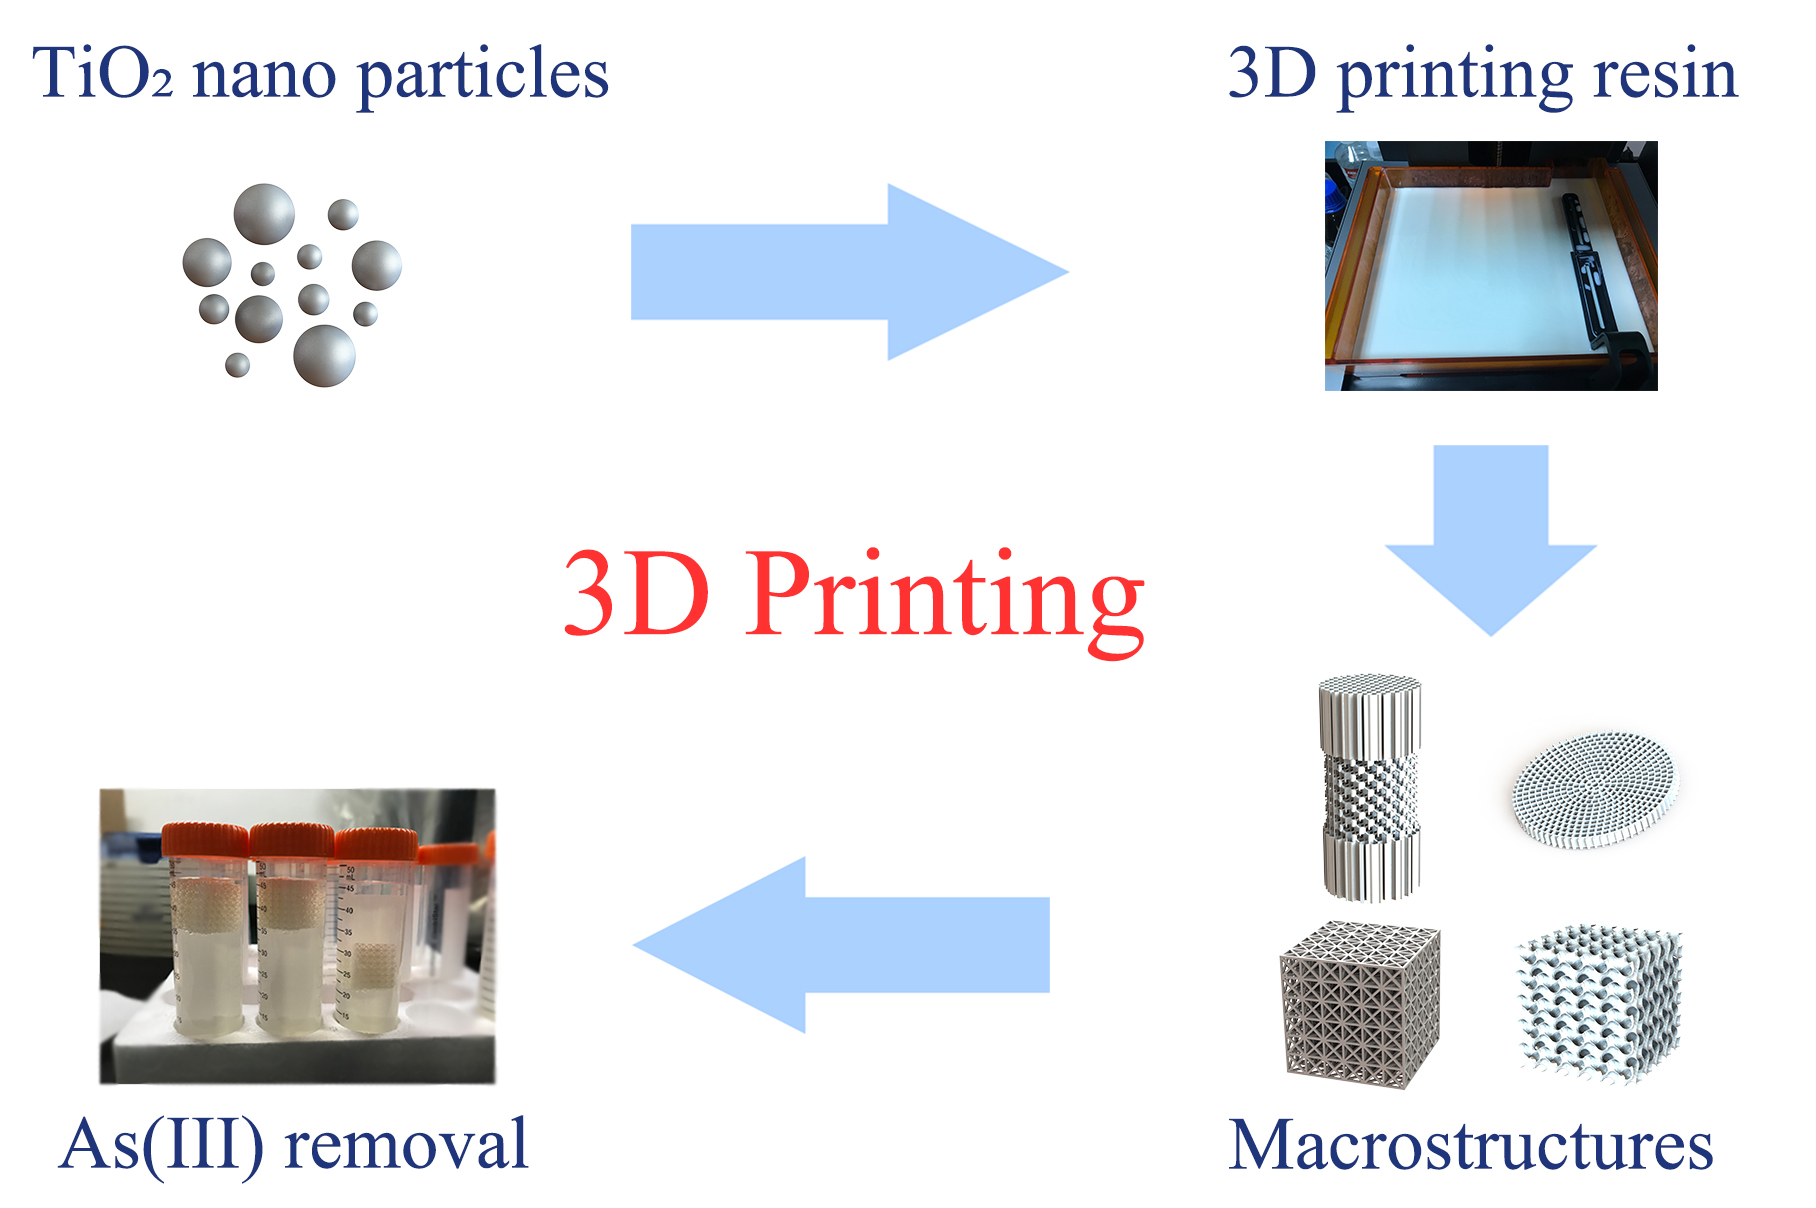 3D printing of TiO2 nano particles containing macrostructures for As(III) removal in water